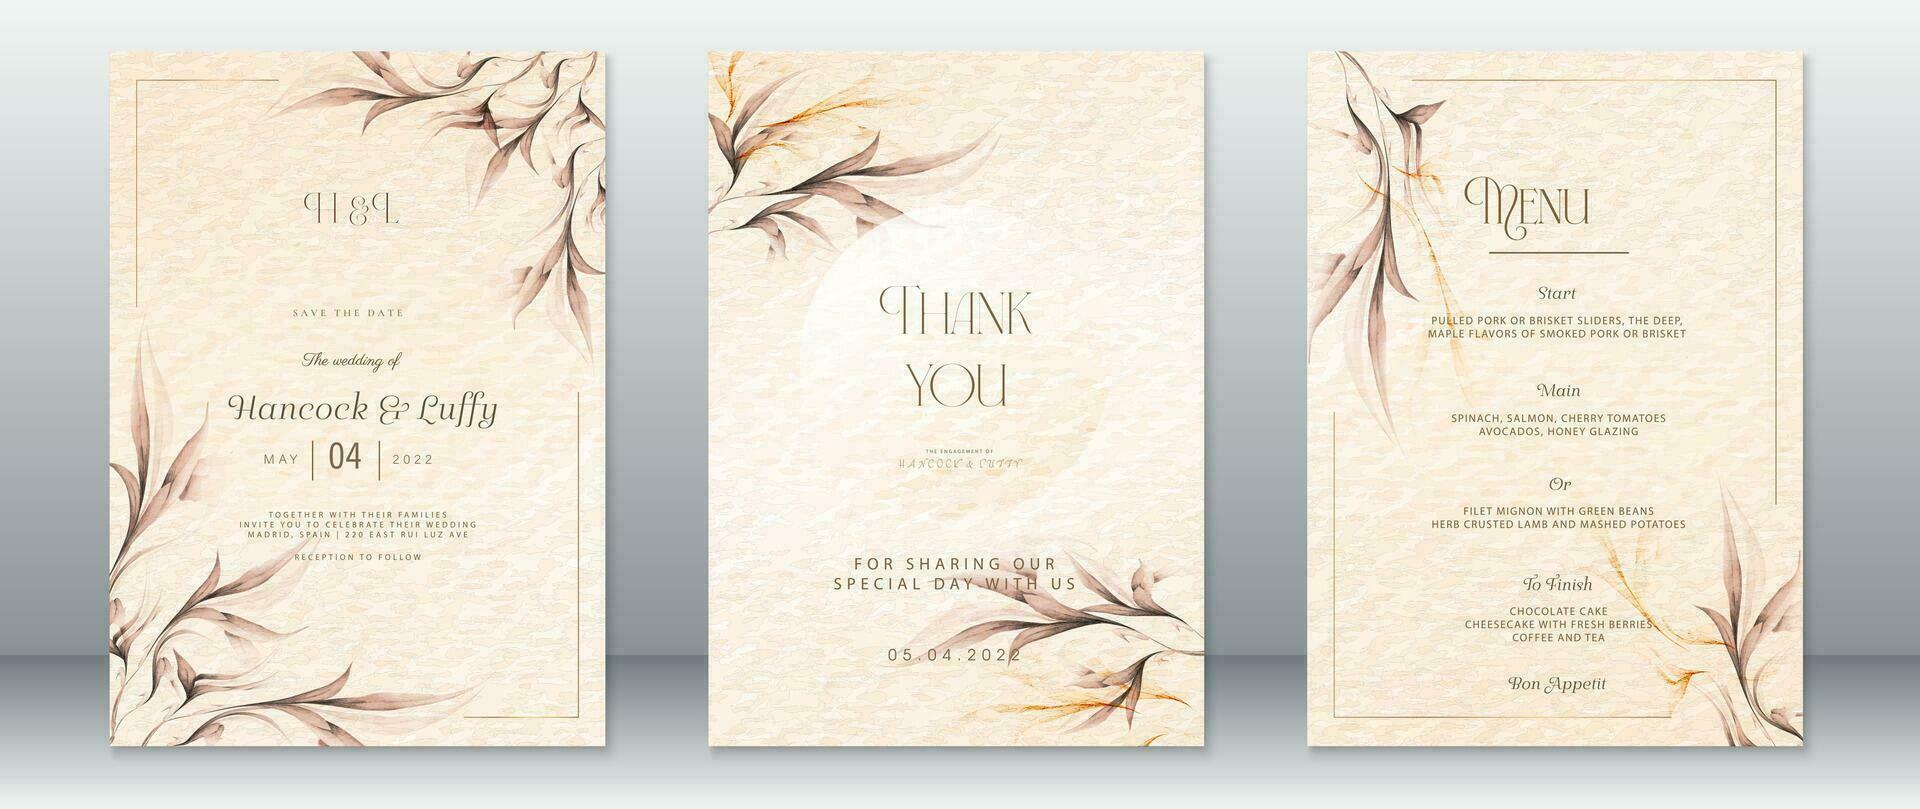 Wedding invitation card template design with nature leaf vector